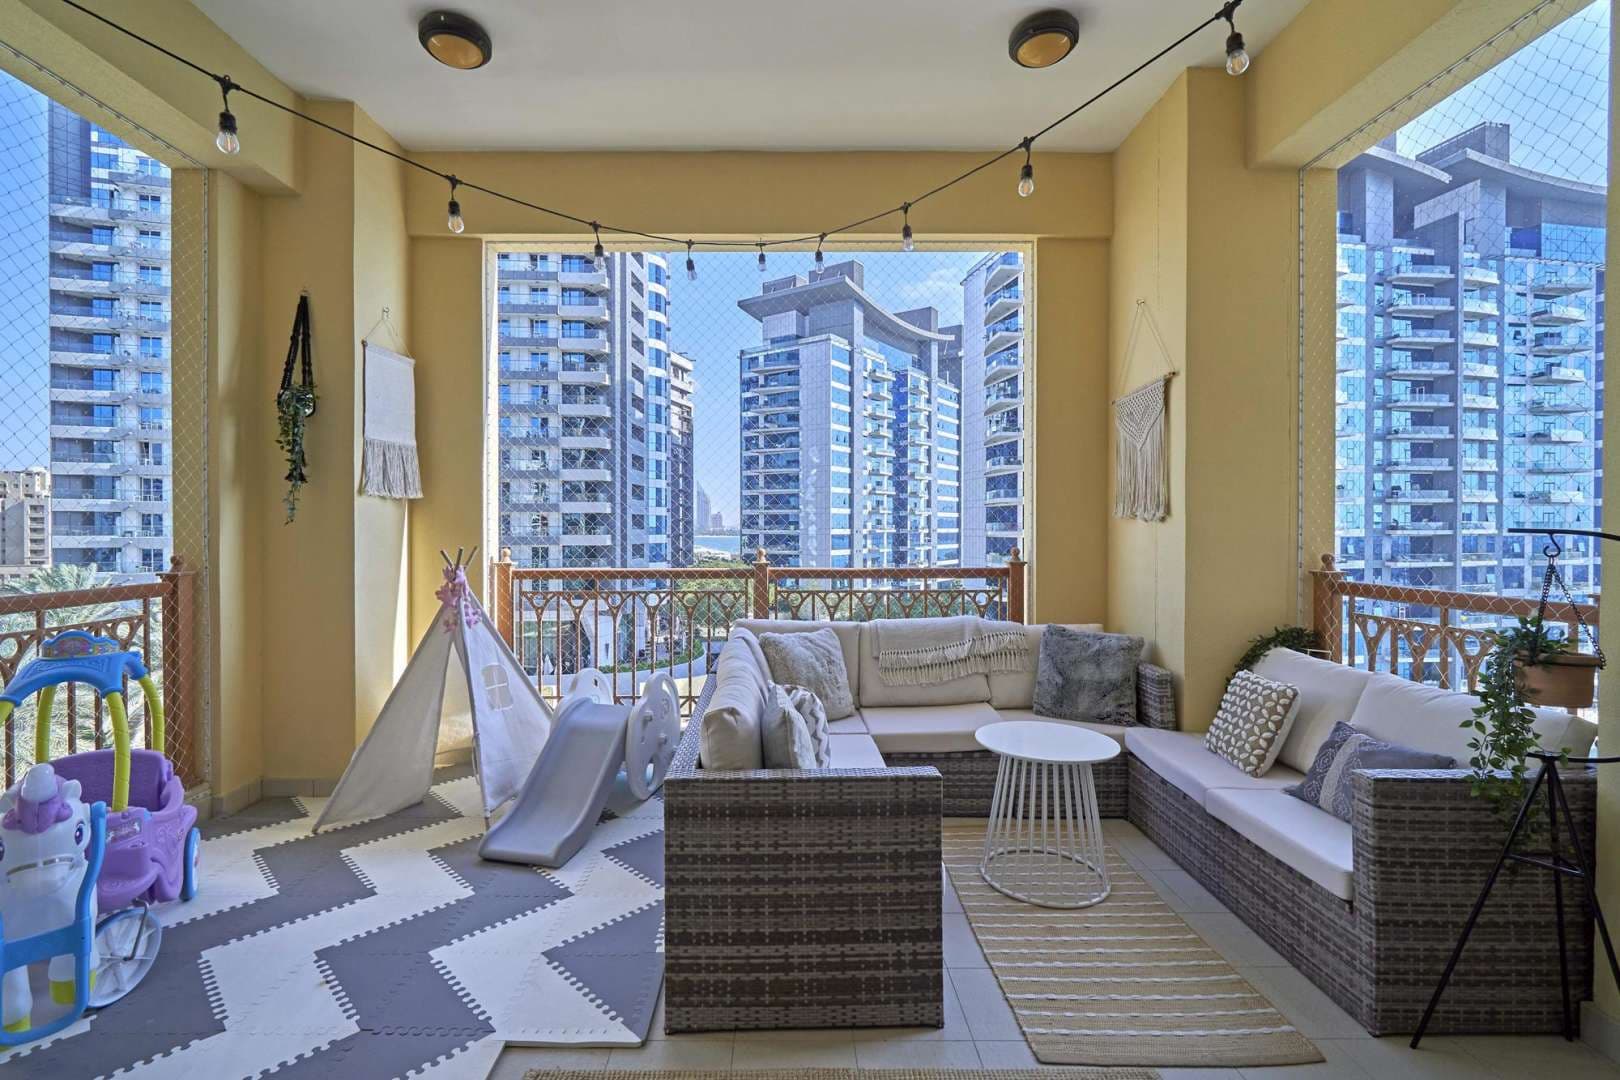 2 Bedroom Apartment For Sale Marina Residences Lp05750 25972835579f6a00.jpg